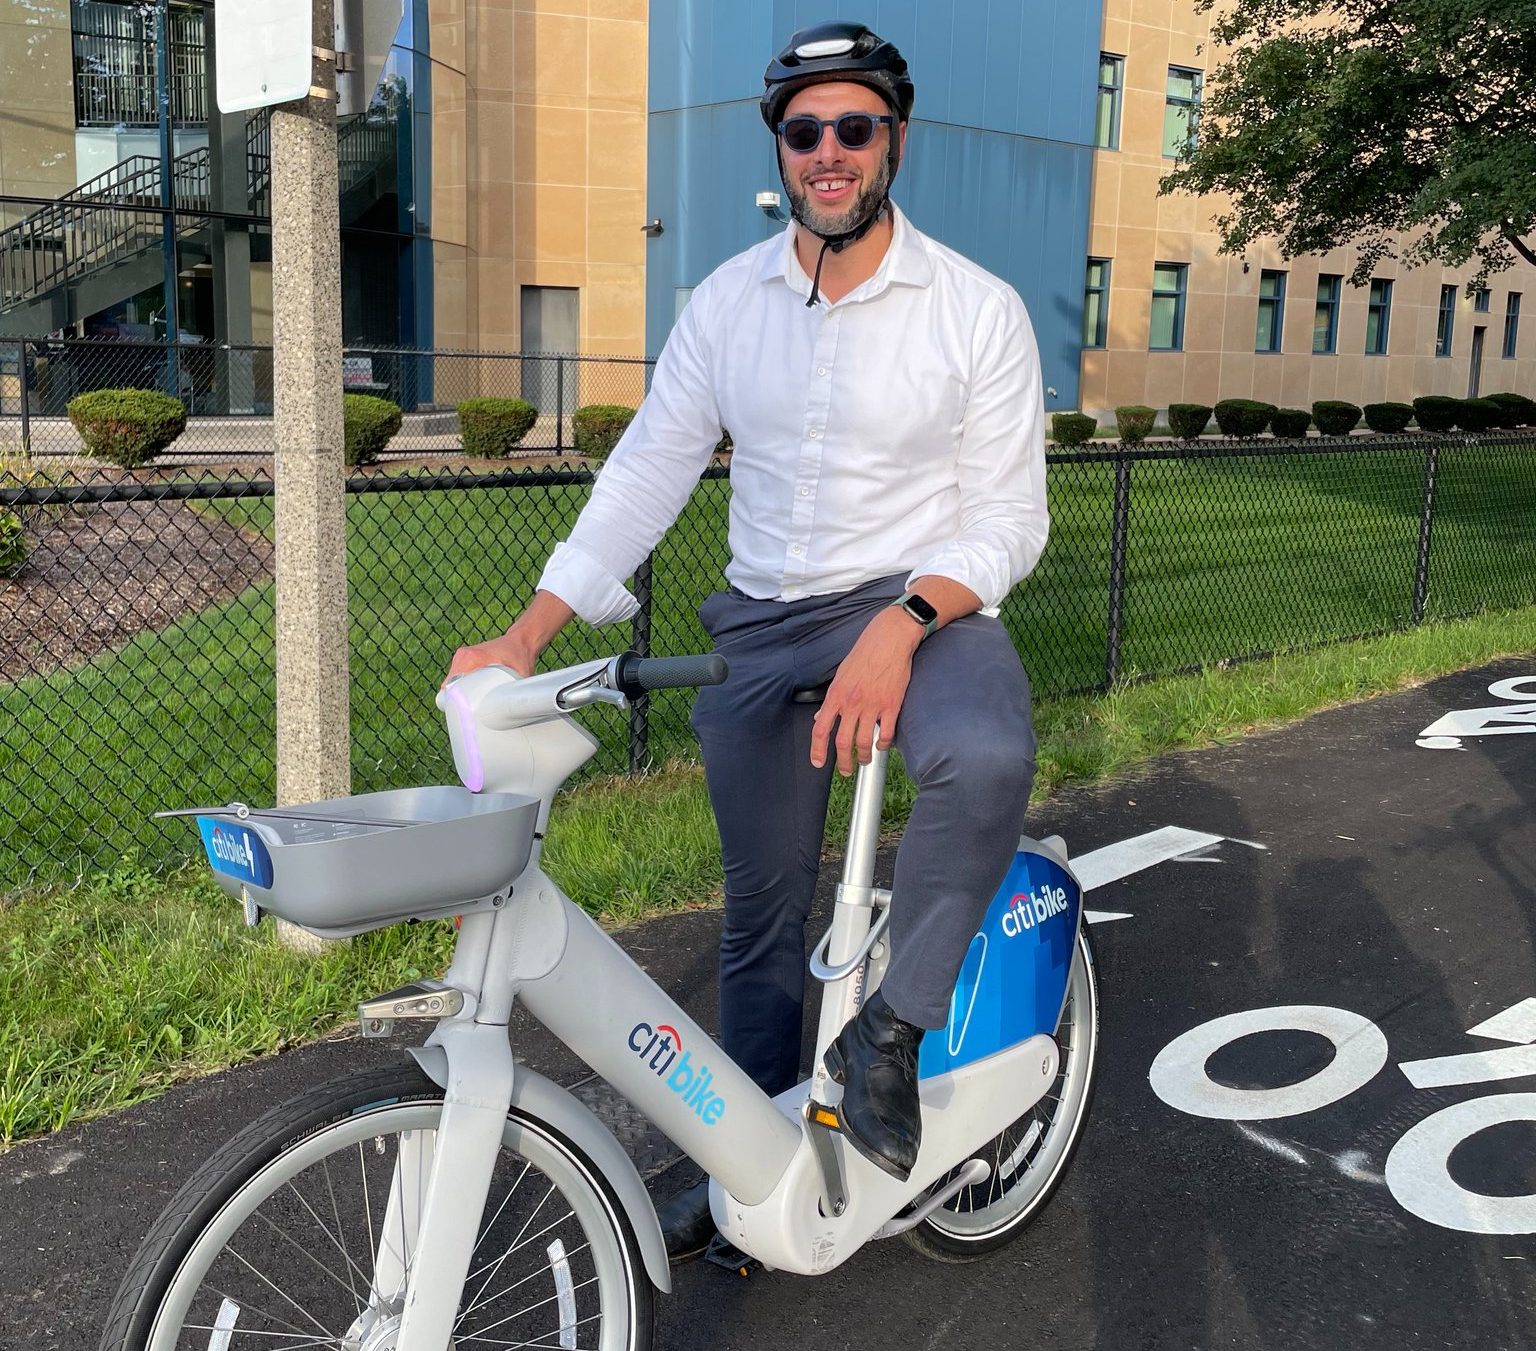 A man in a collared white shirt, sunglasses, and a helmet sits astride a sleek grey bike with the "citibike" logo on the side.